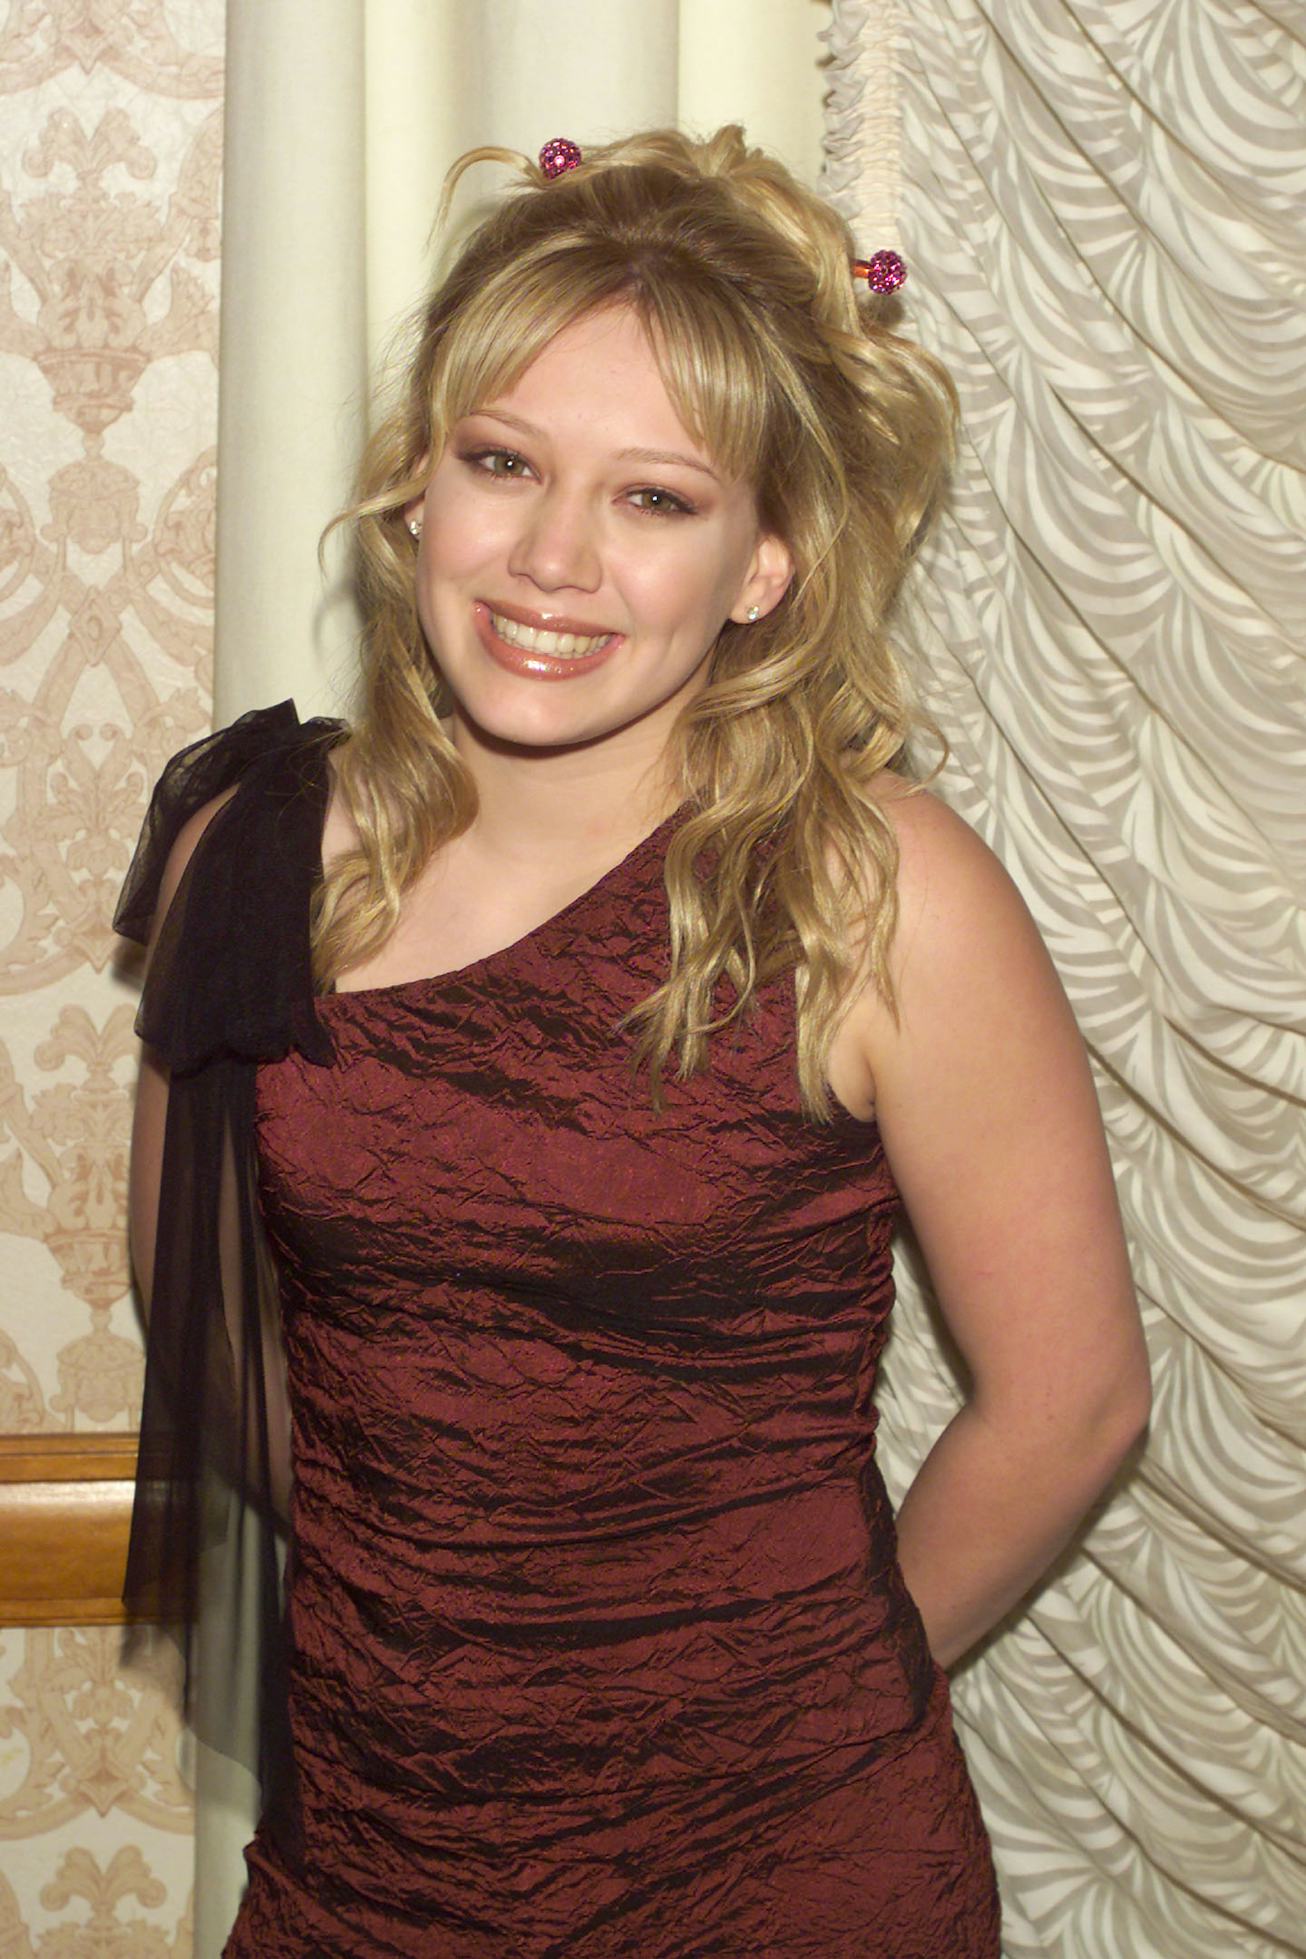 Hilary Duff, the star of the ABC/Disney Channel show "Lizzie McGuire", was a presenter at the 29th I...